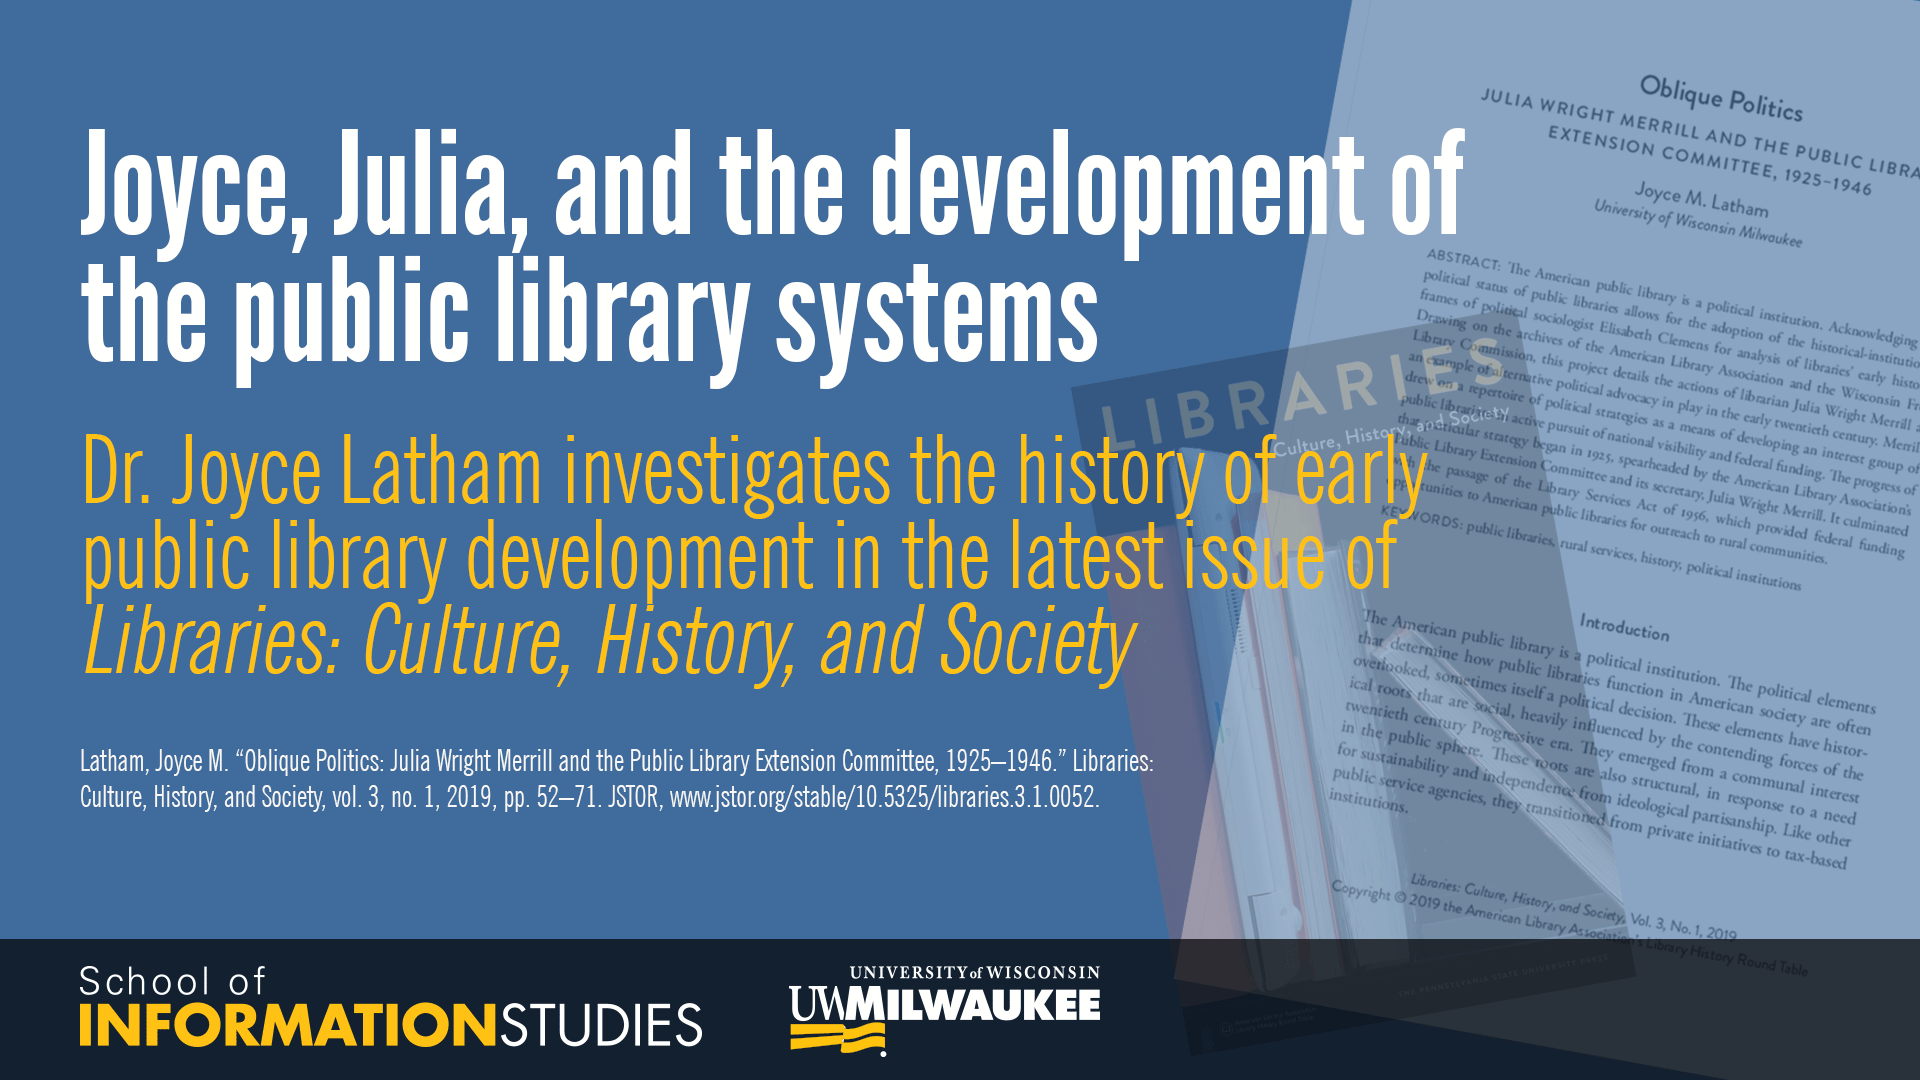 Joyce, Julia, and the development of public library systems